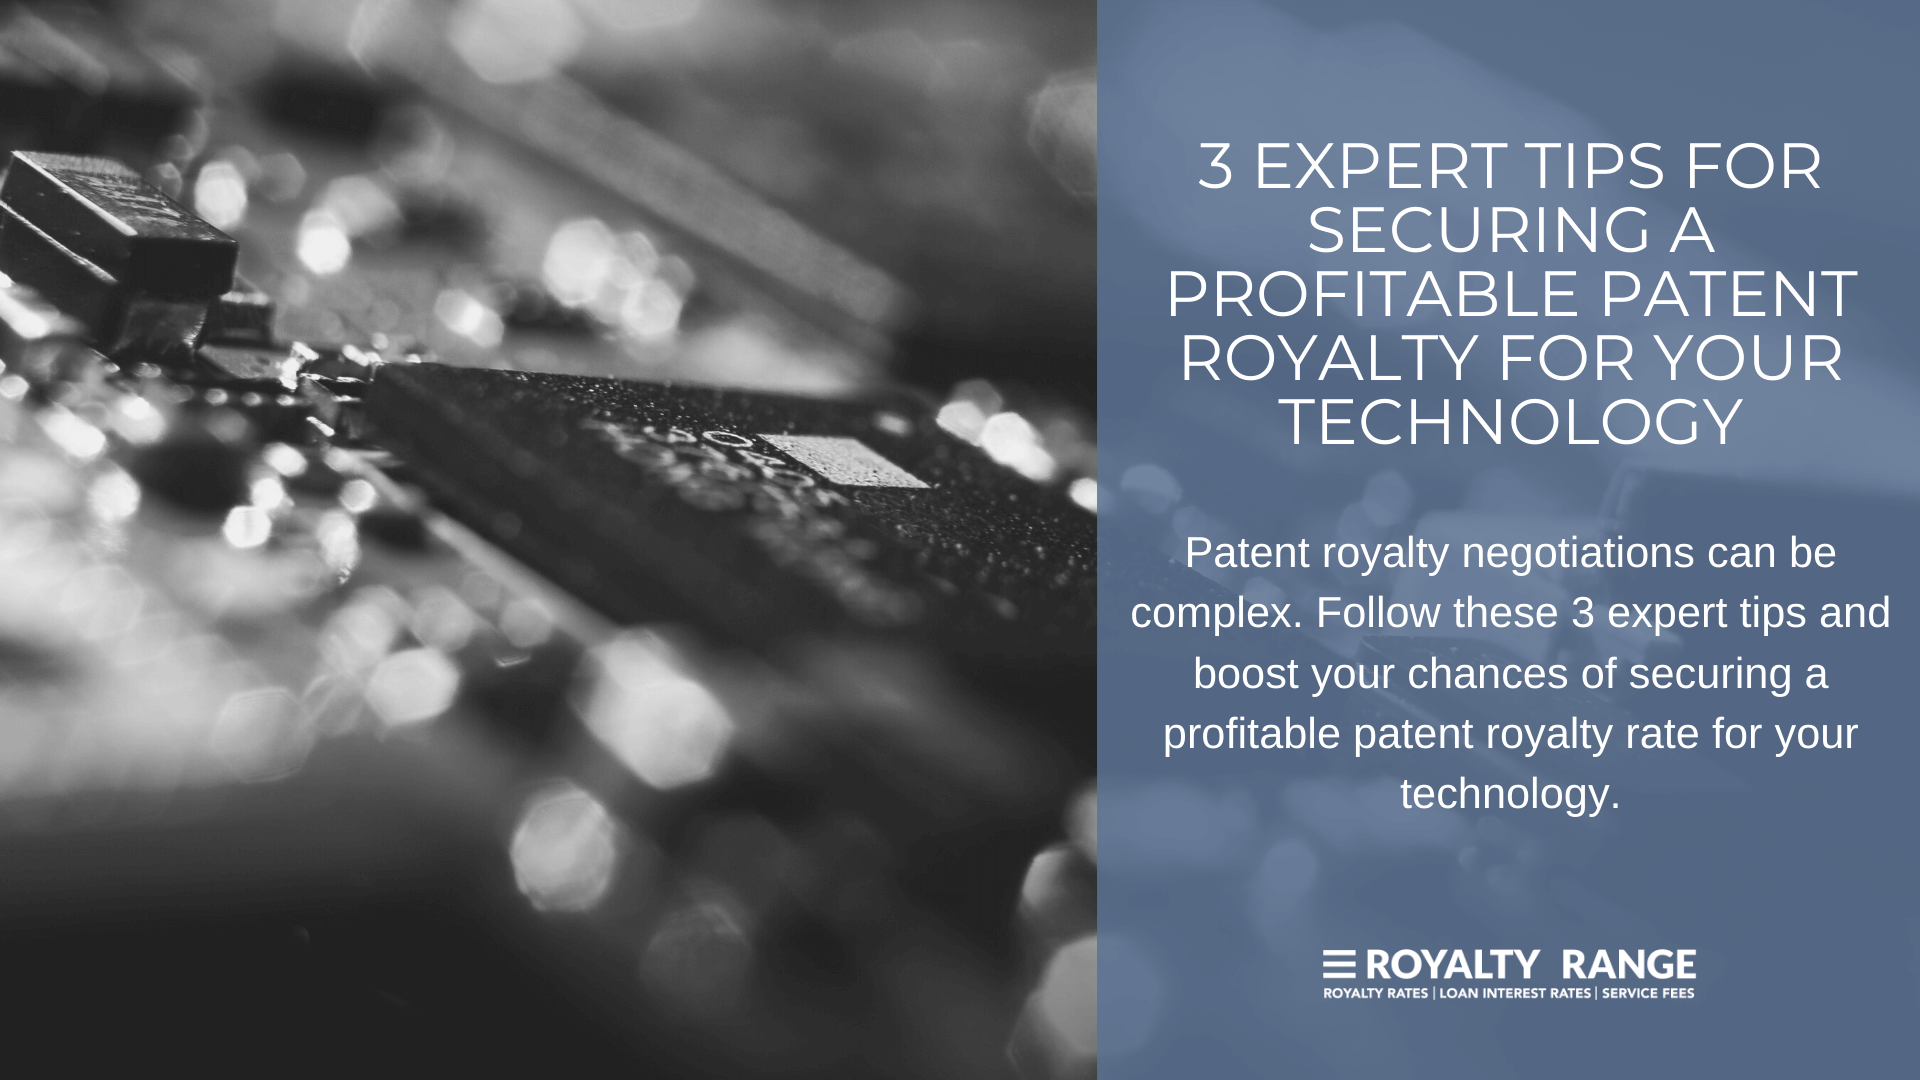 3 expert tips for securing a profitable patent royalty for your technology